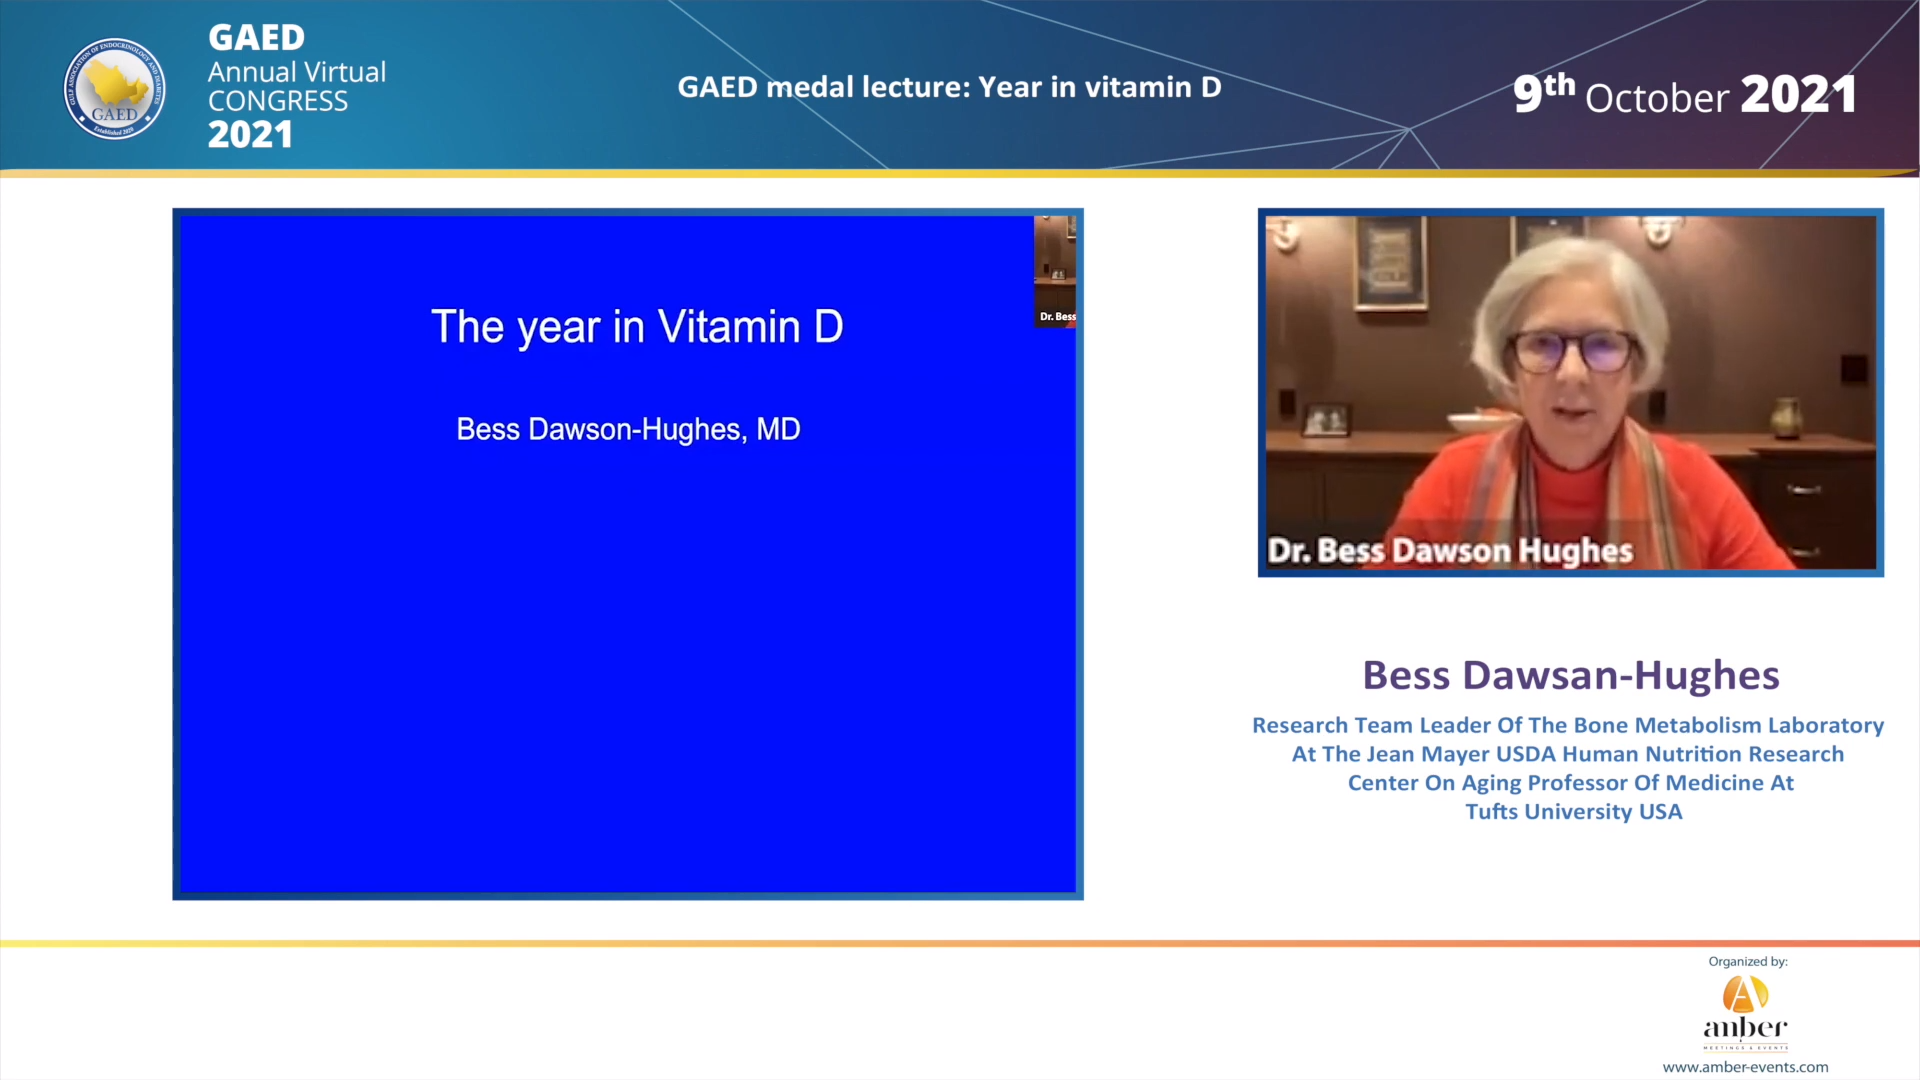 9.10.21 - Day 3, GAED medal lecture - Year in vitamin D